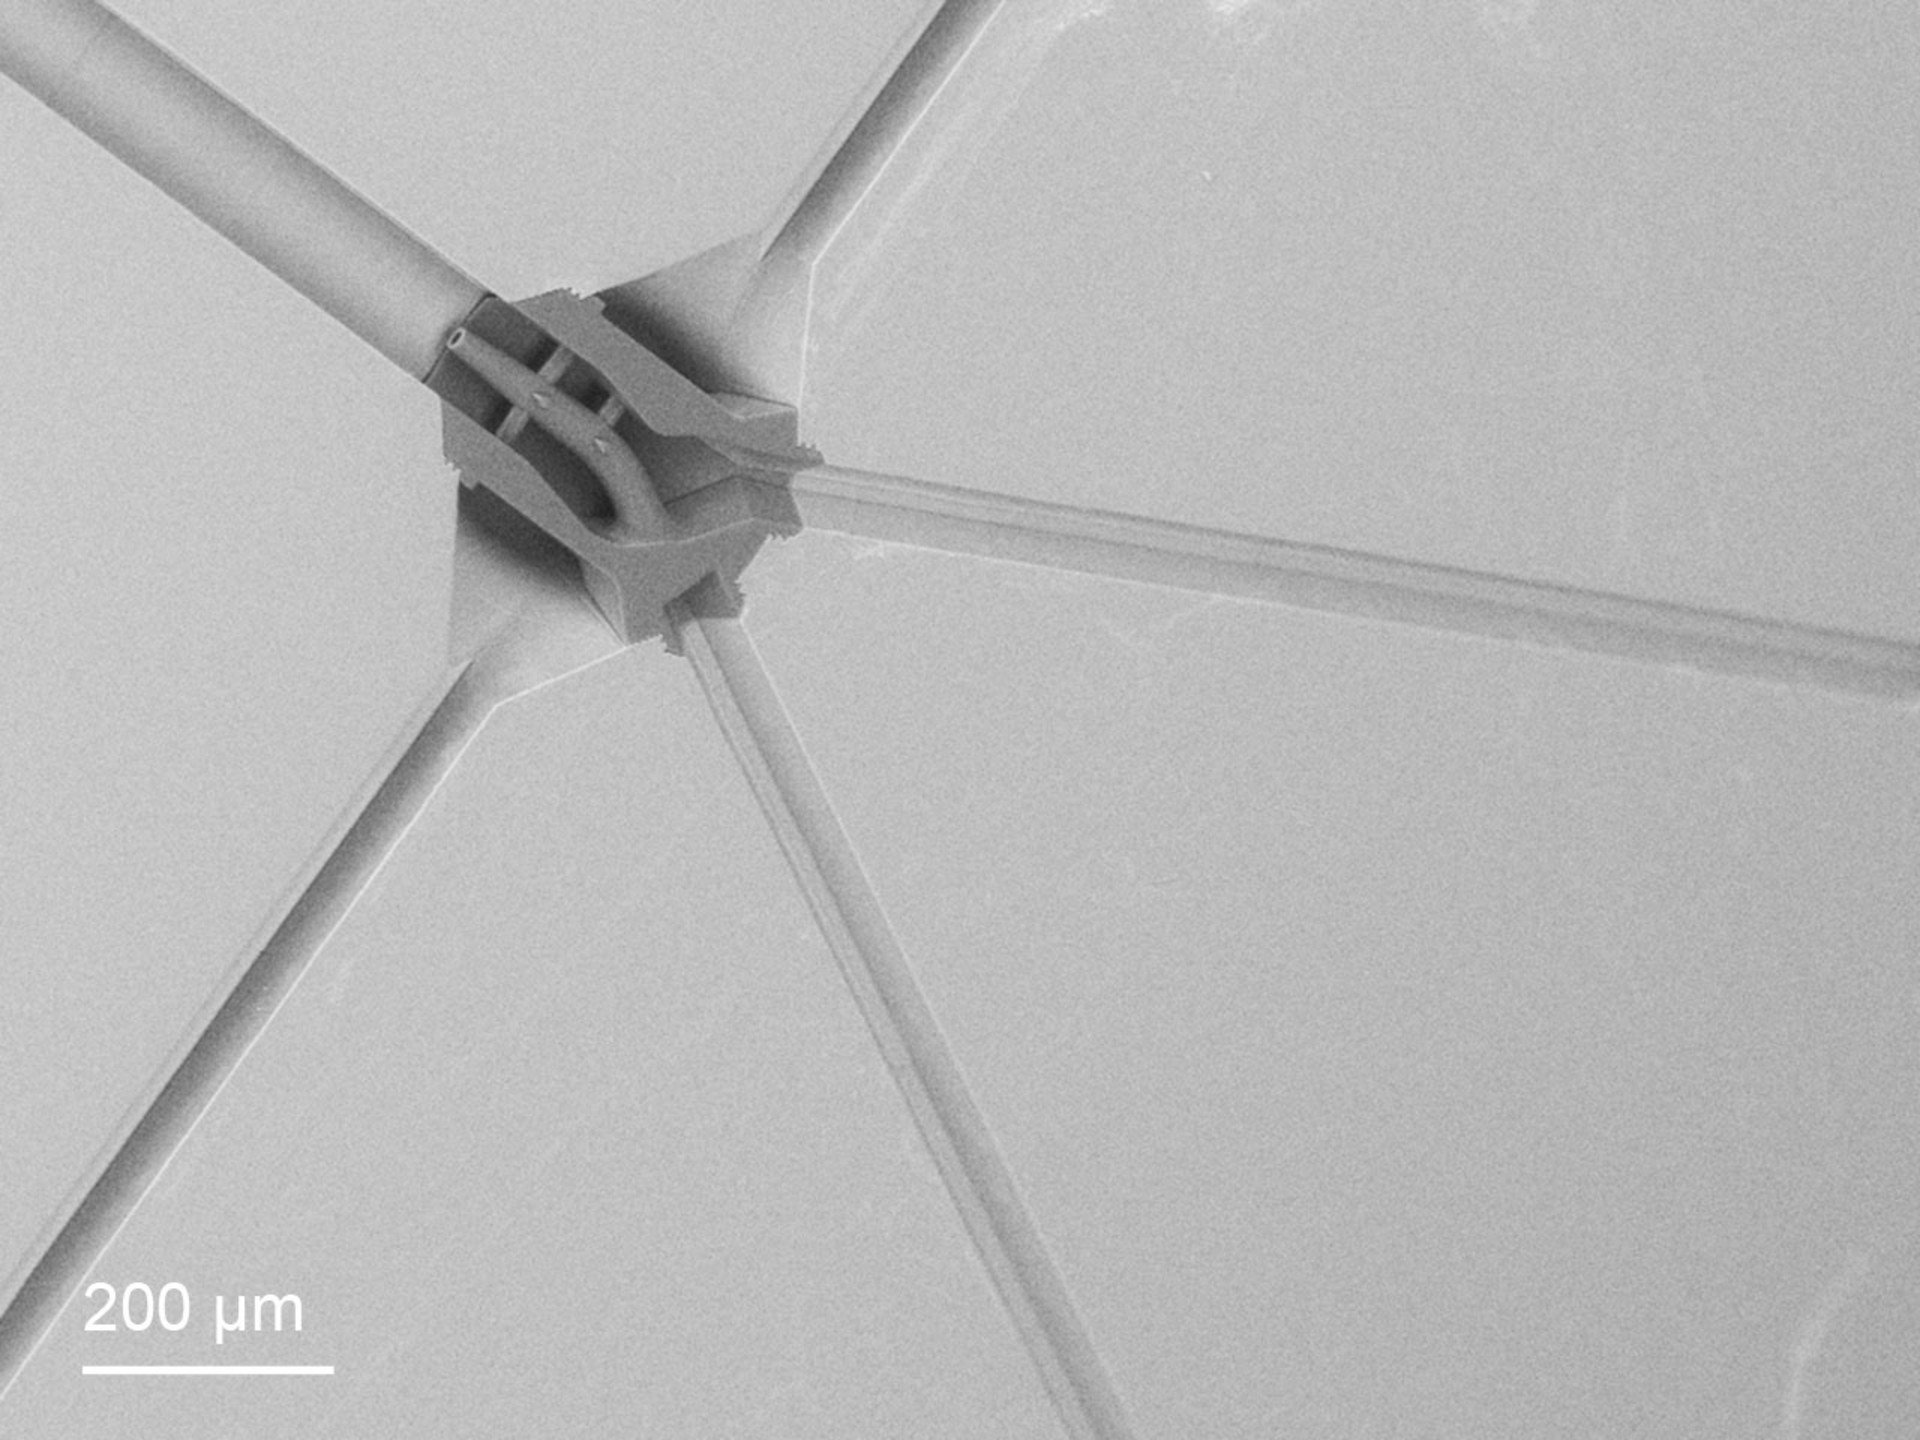 Embedded spinneret directly 3D-printed into a microfluidic channel system